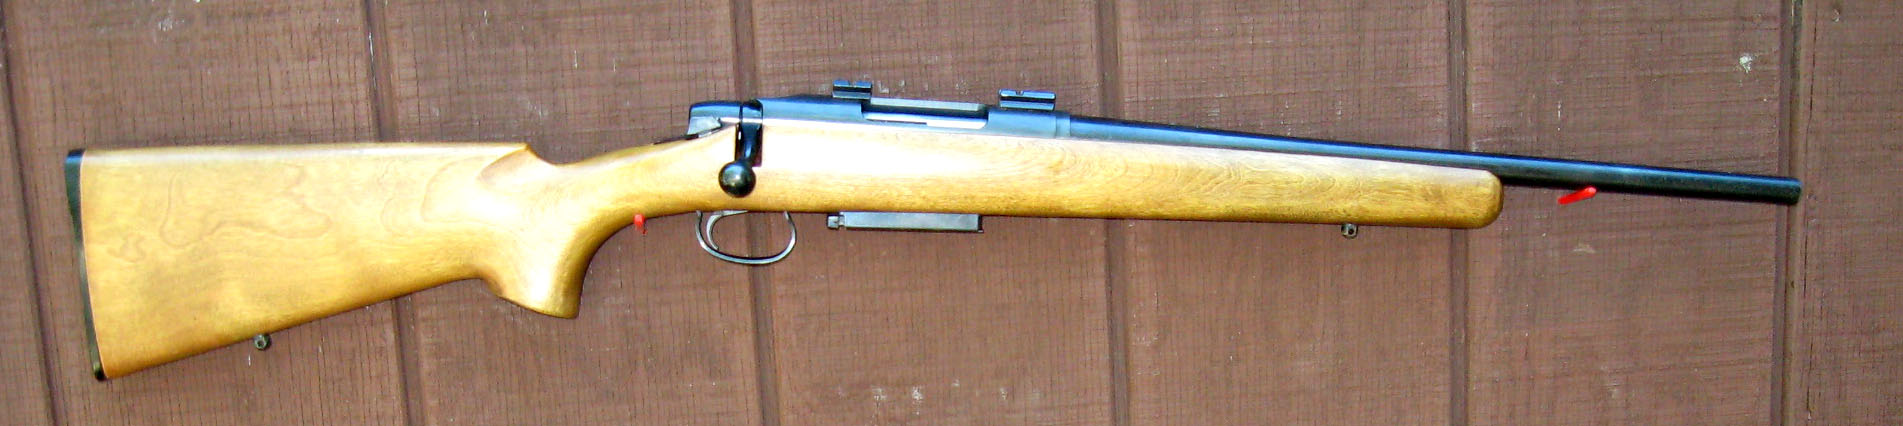 remington 788 date of manufacture